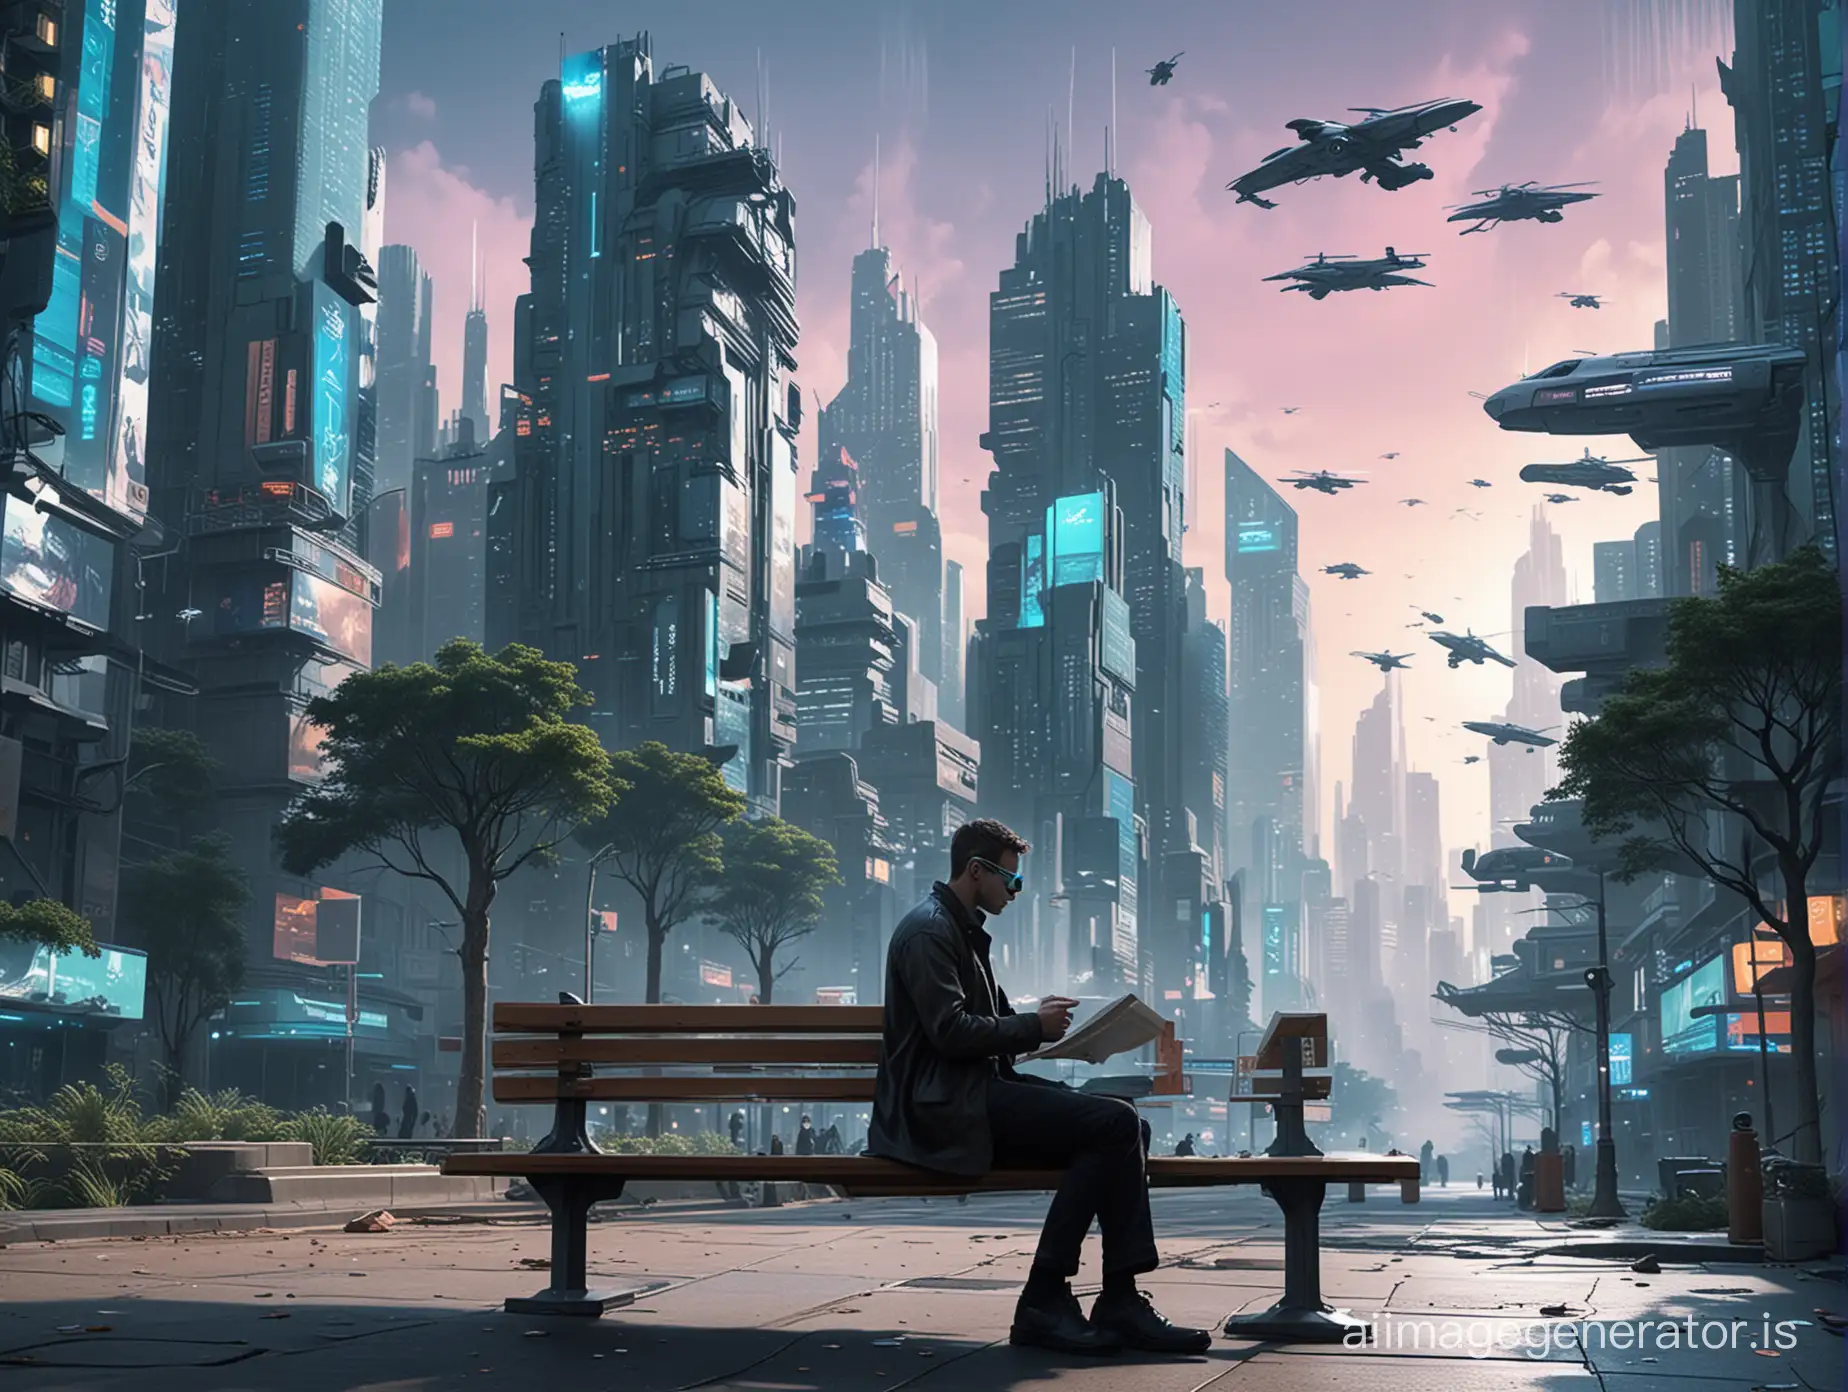 A sleek, futuristic city in the style of Blade Runner with interconnected buildings and flying vehicles. Everyone wears augmented reality glasses with a prominent logo, completely absorbed in the virtual world. Foreground: A lone person sits on a park bench, looking up at the sky with a longing expression, holding a book with a faded cover. Coloring: Cool blues and whites for the cityscape, vibrant colors for the AR displays, muted tones for the person and the book.